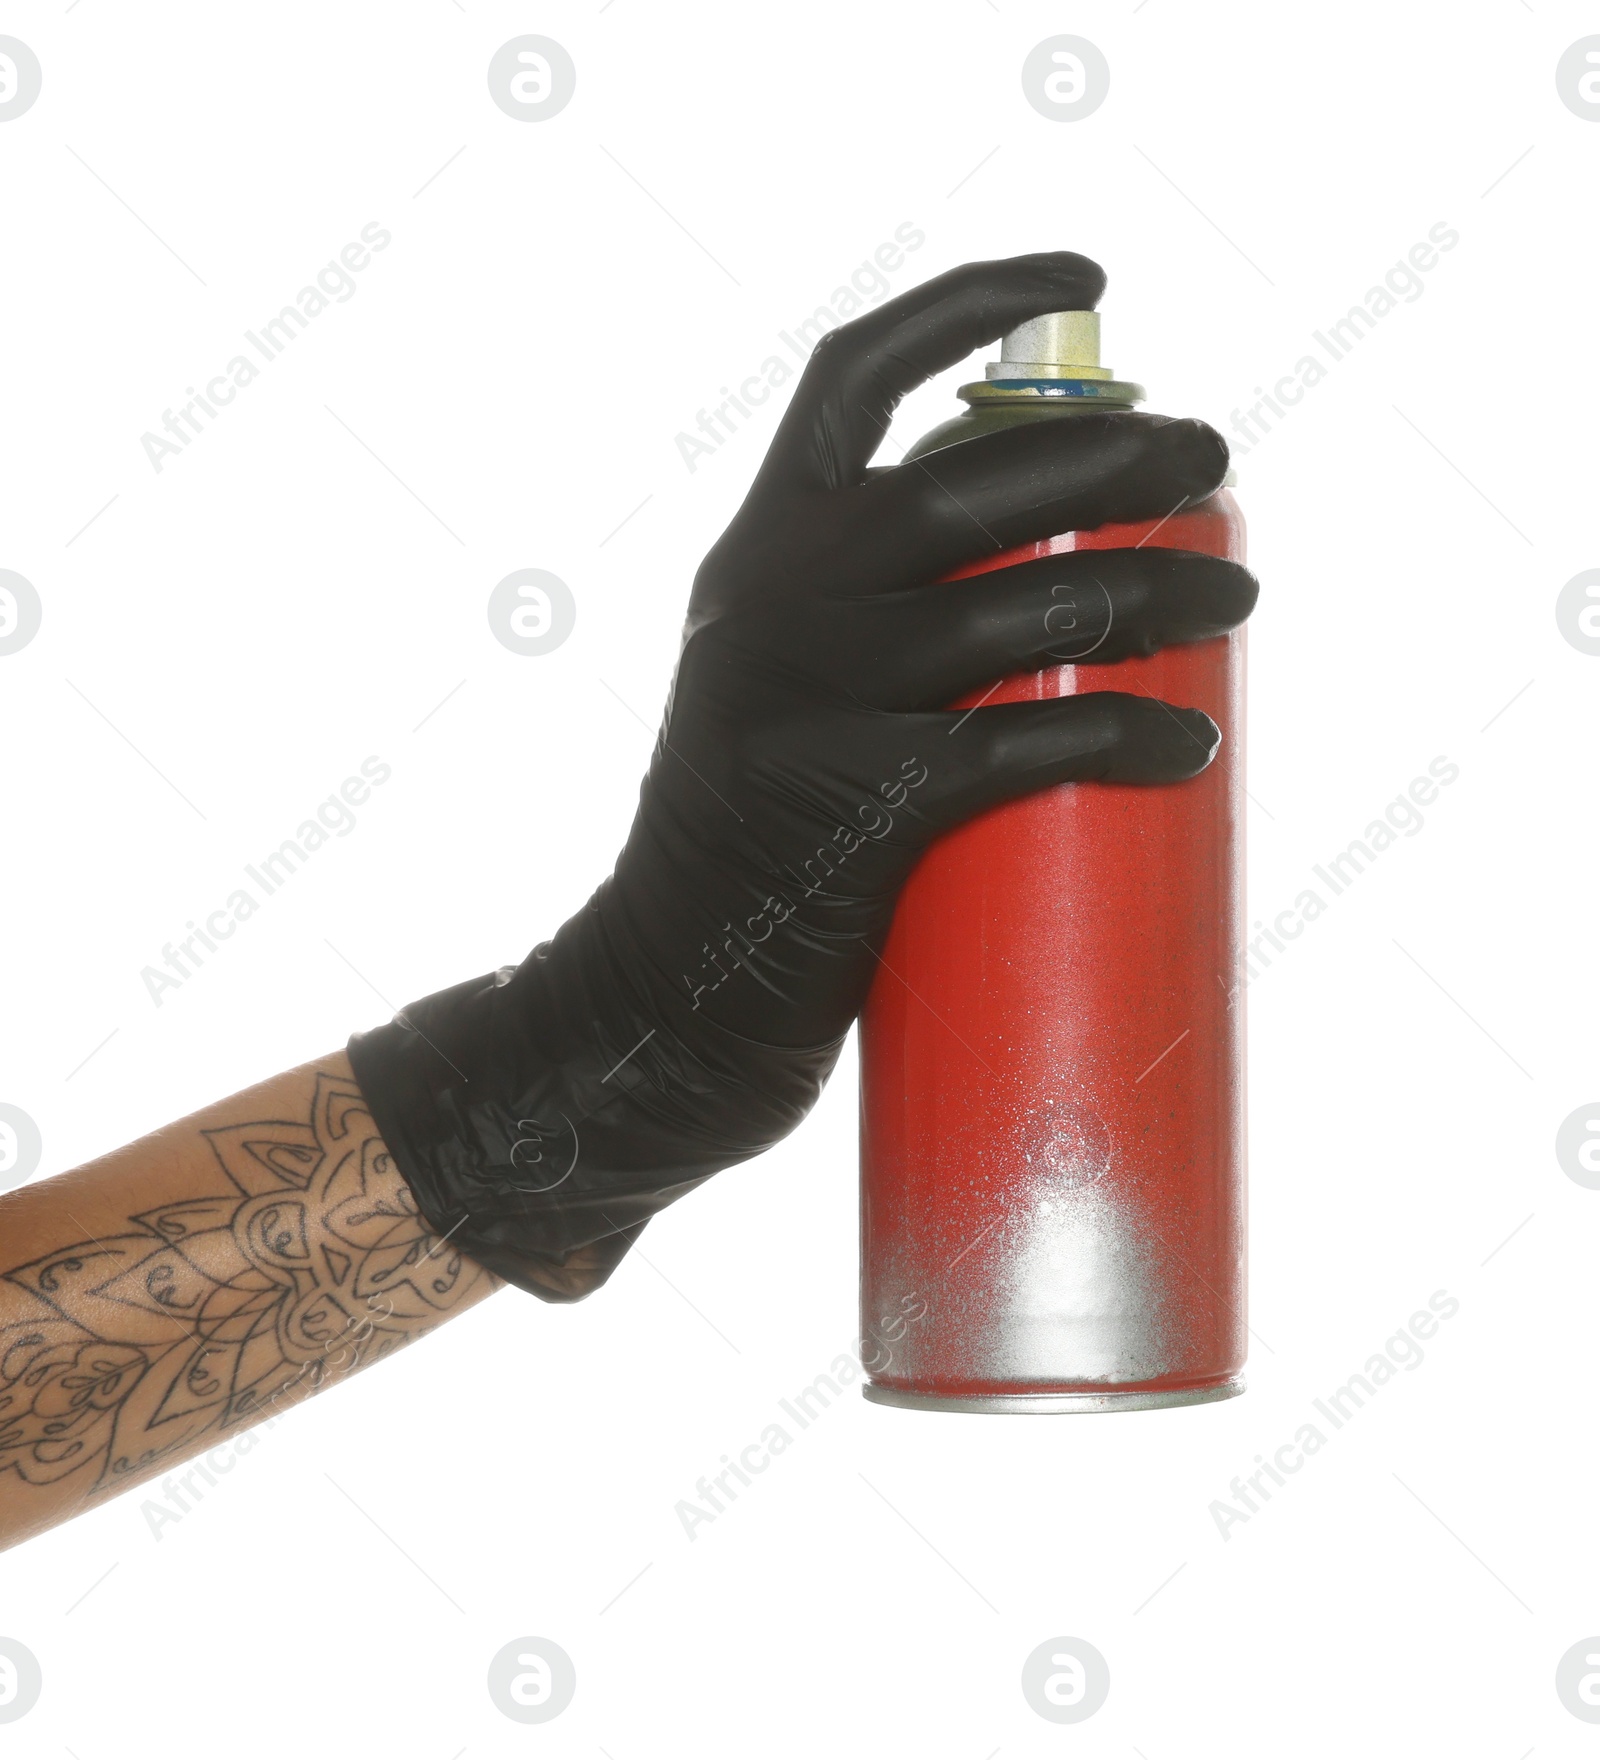 Photo of Woman holding used can of spray paint on white background, closeup